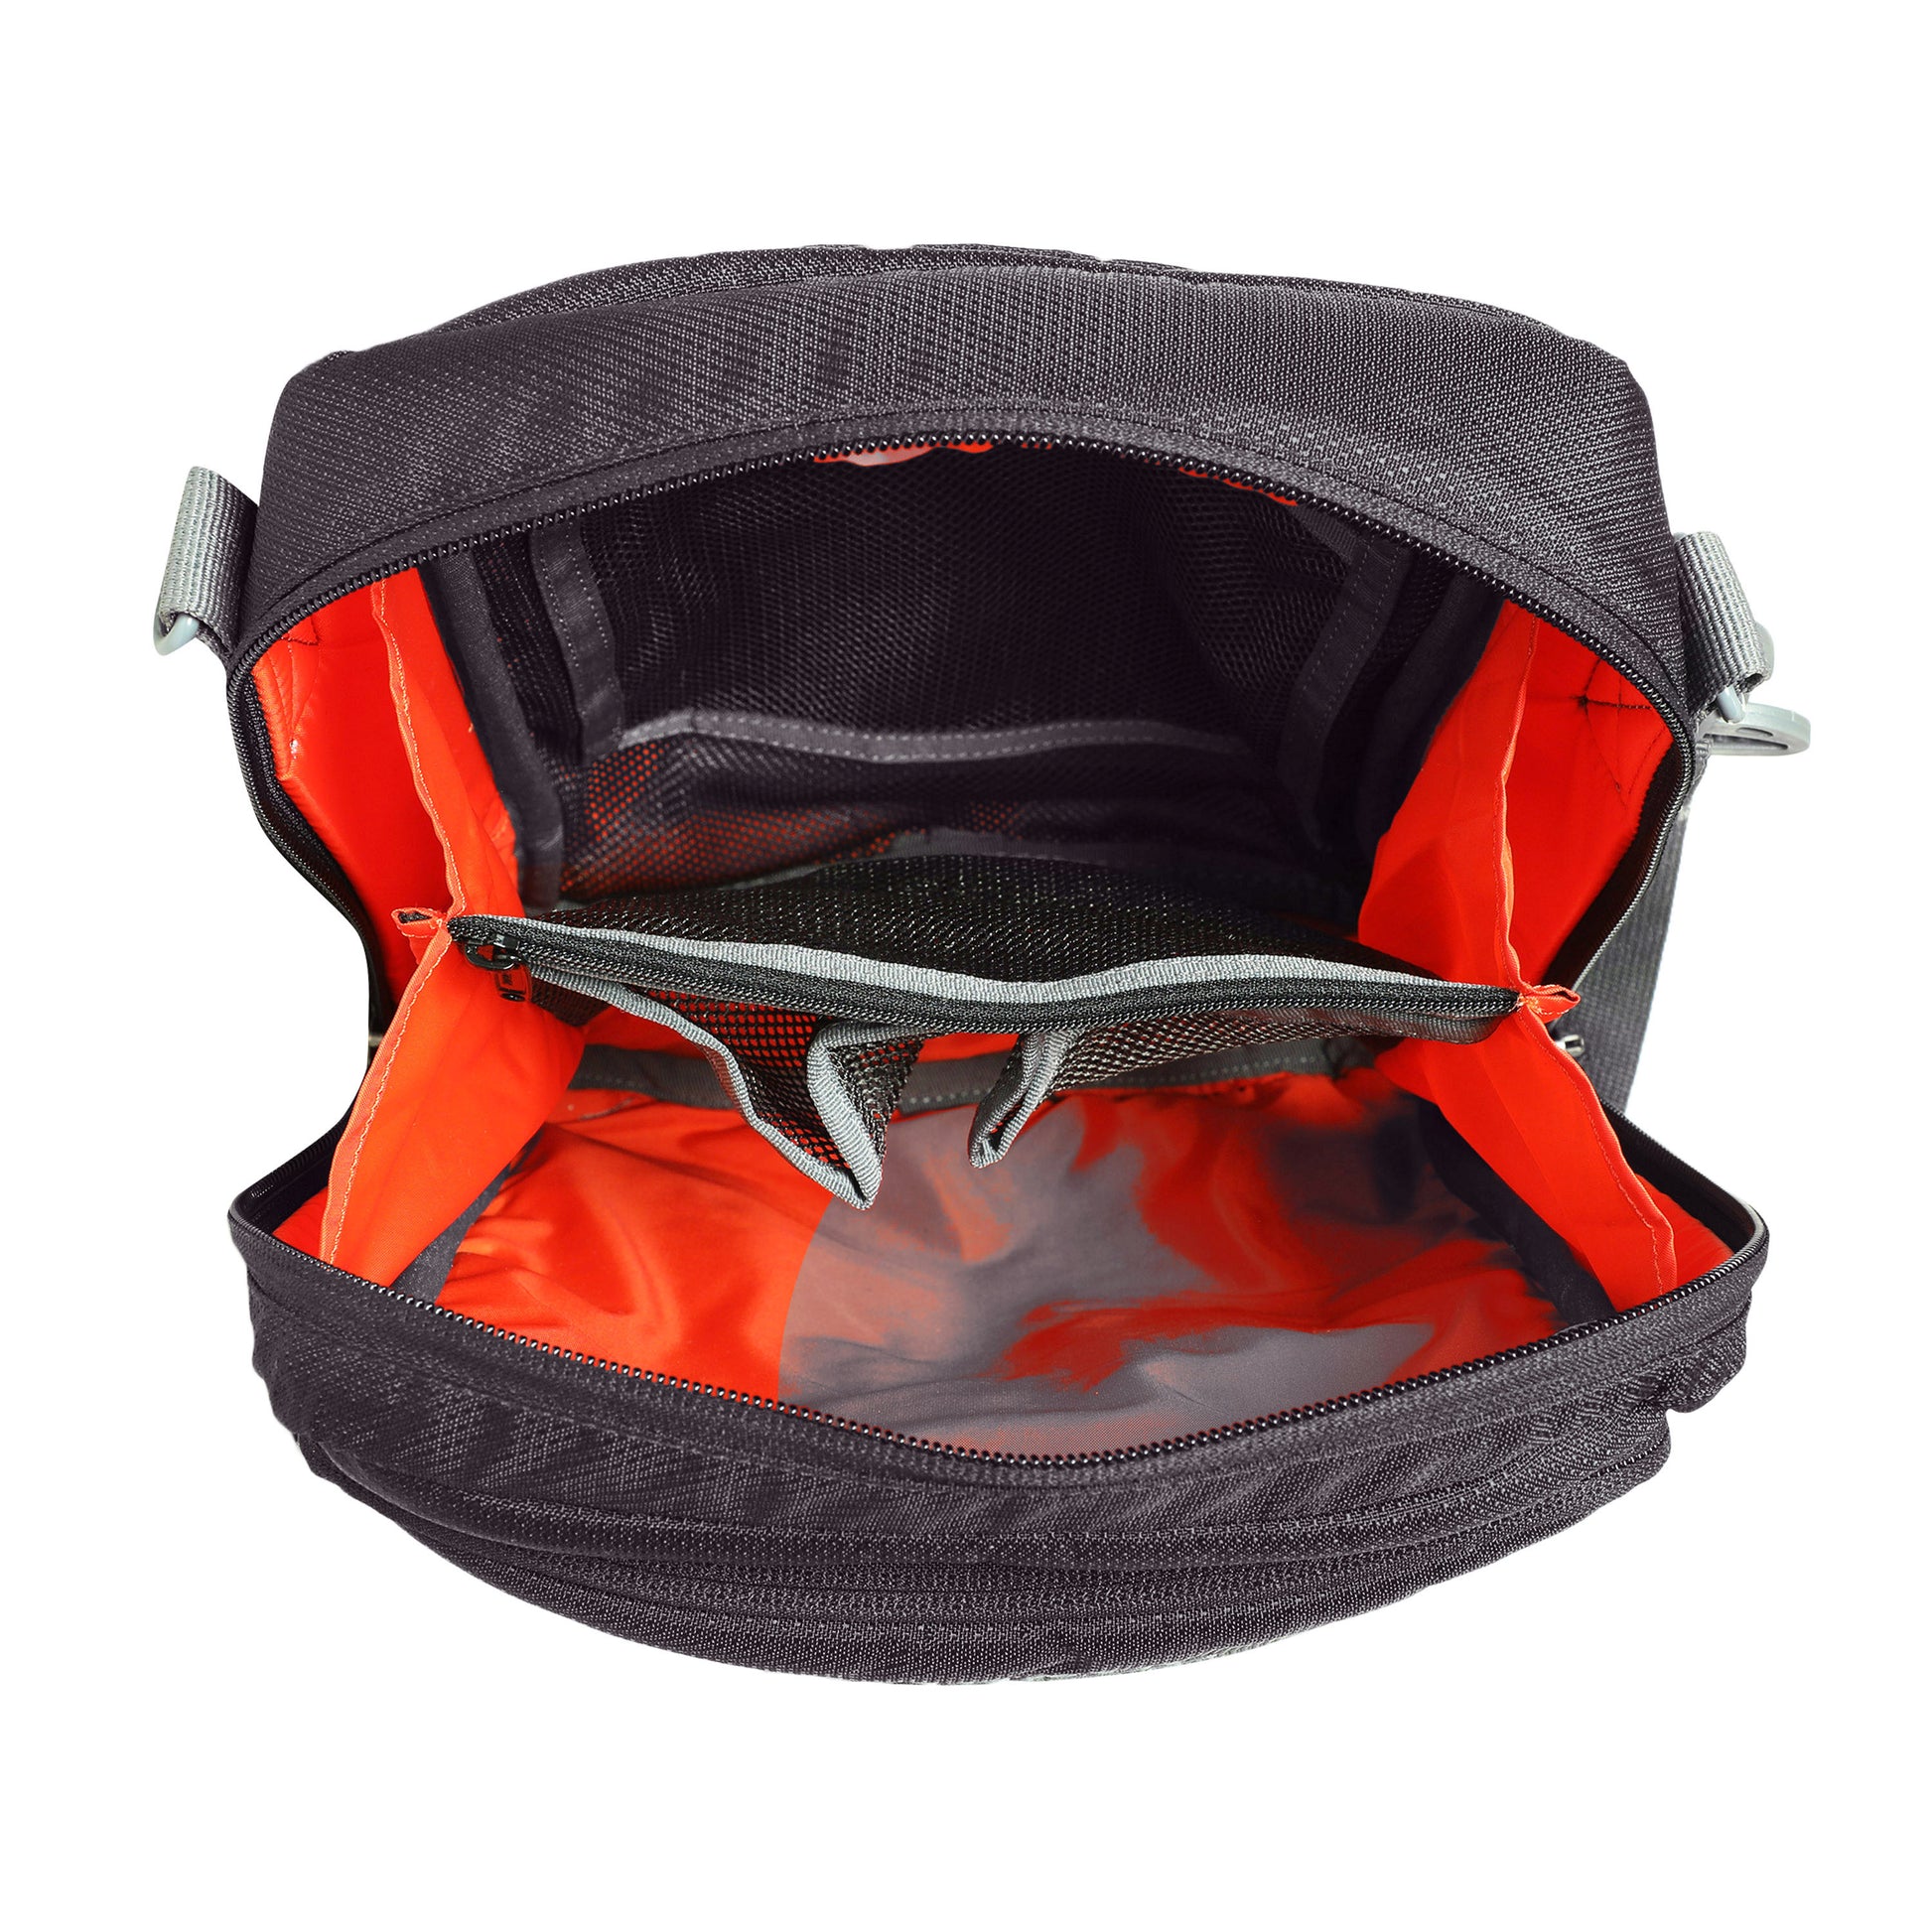 Image: Top view of the P13 Elite sling bag, showcasing its compact and streamlined design. The bag's durable construction and versatile compartments offer convenient storage and organization for photography accessories, making it an ideal choice for photographers seeking portability and functionality.